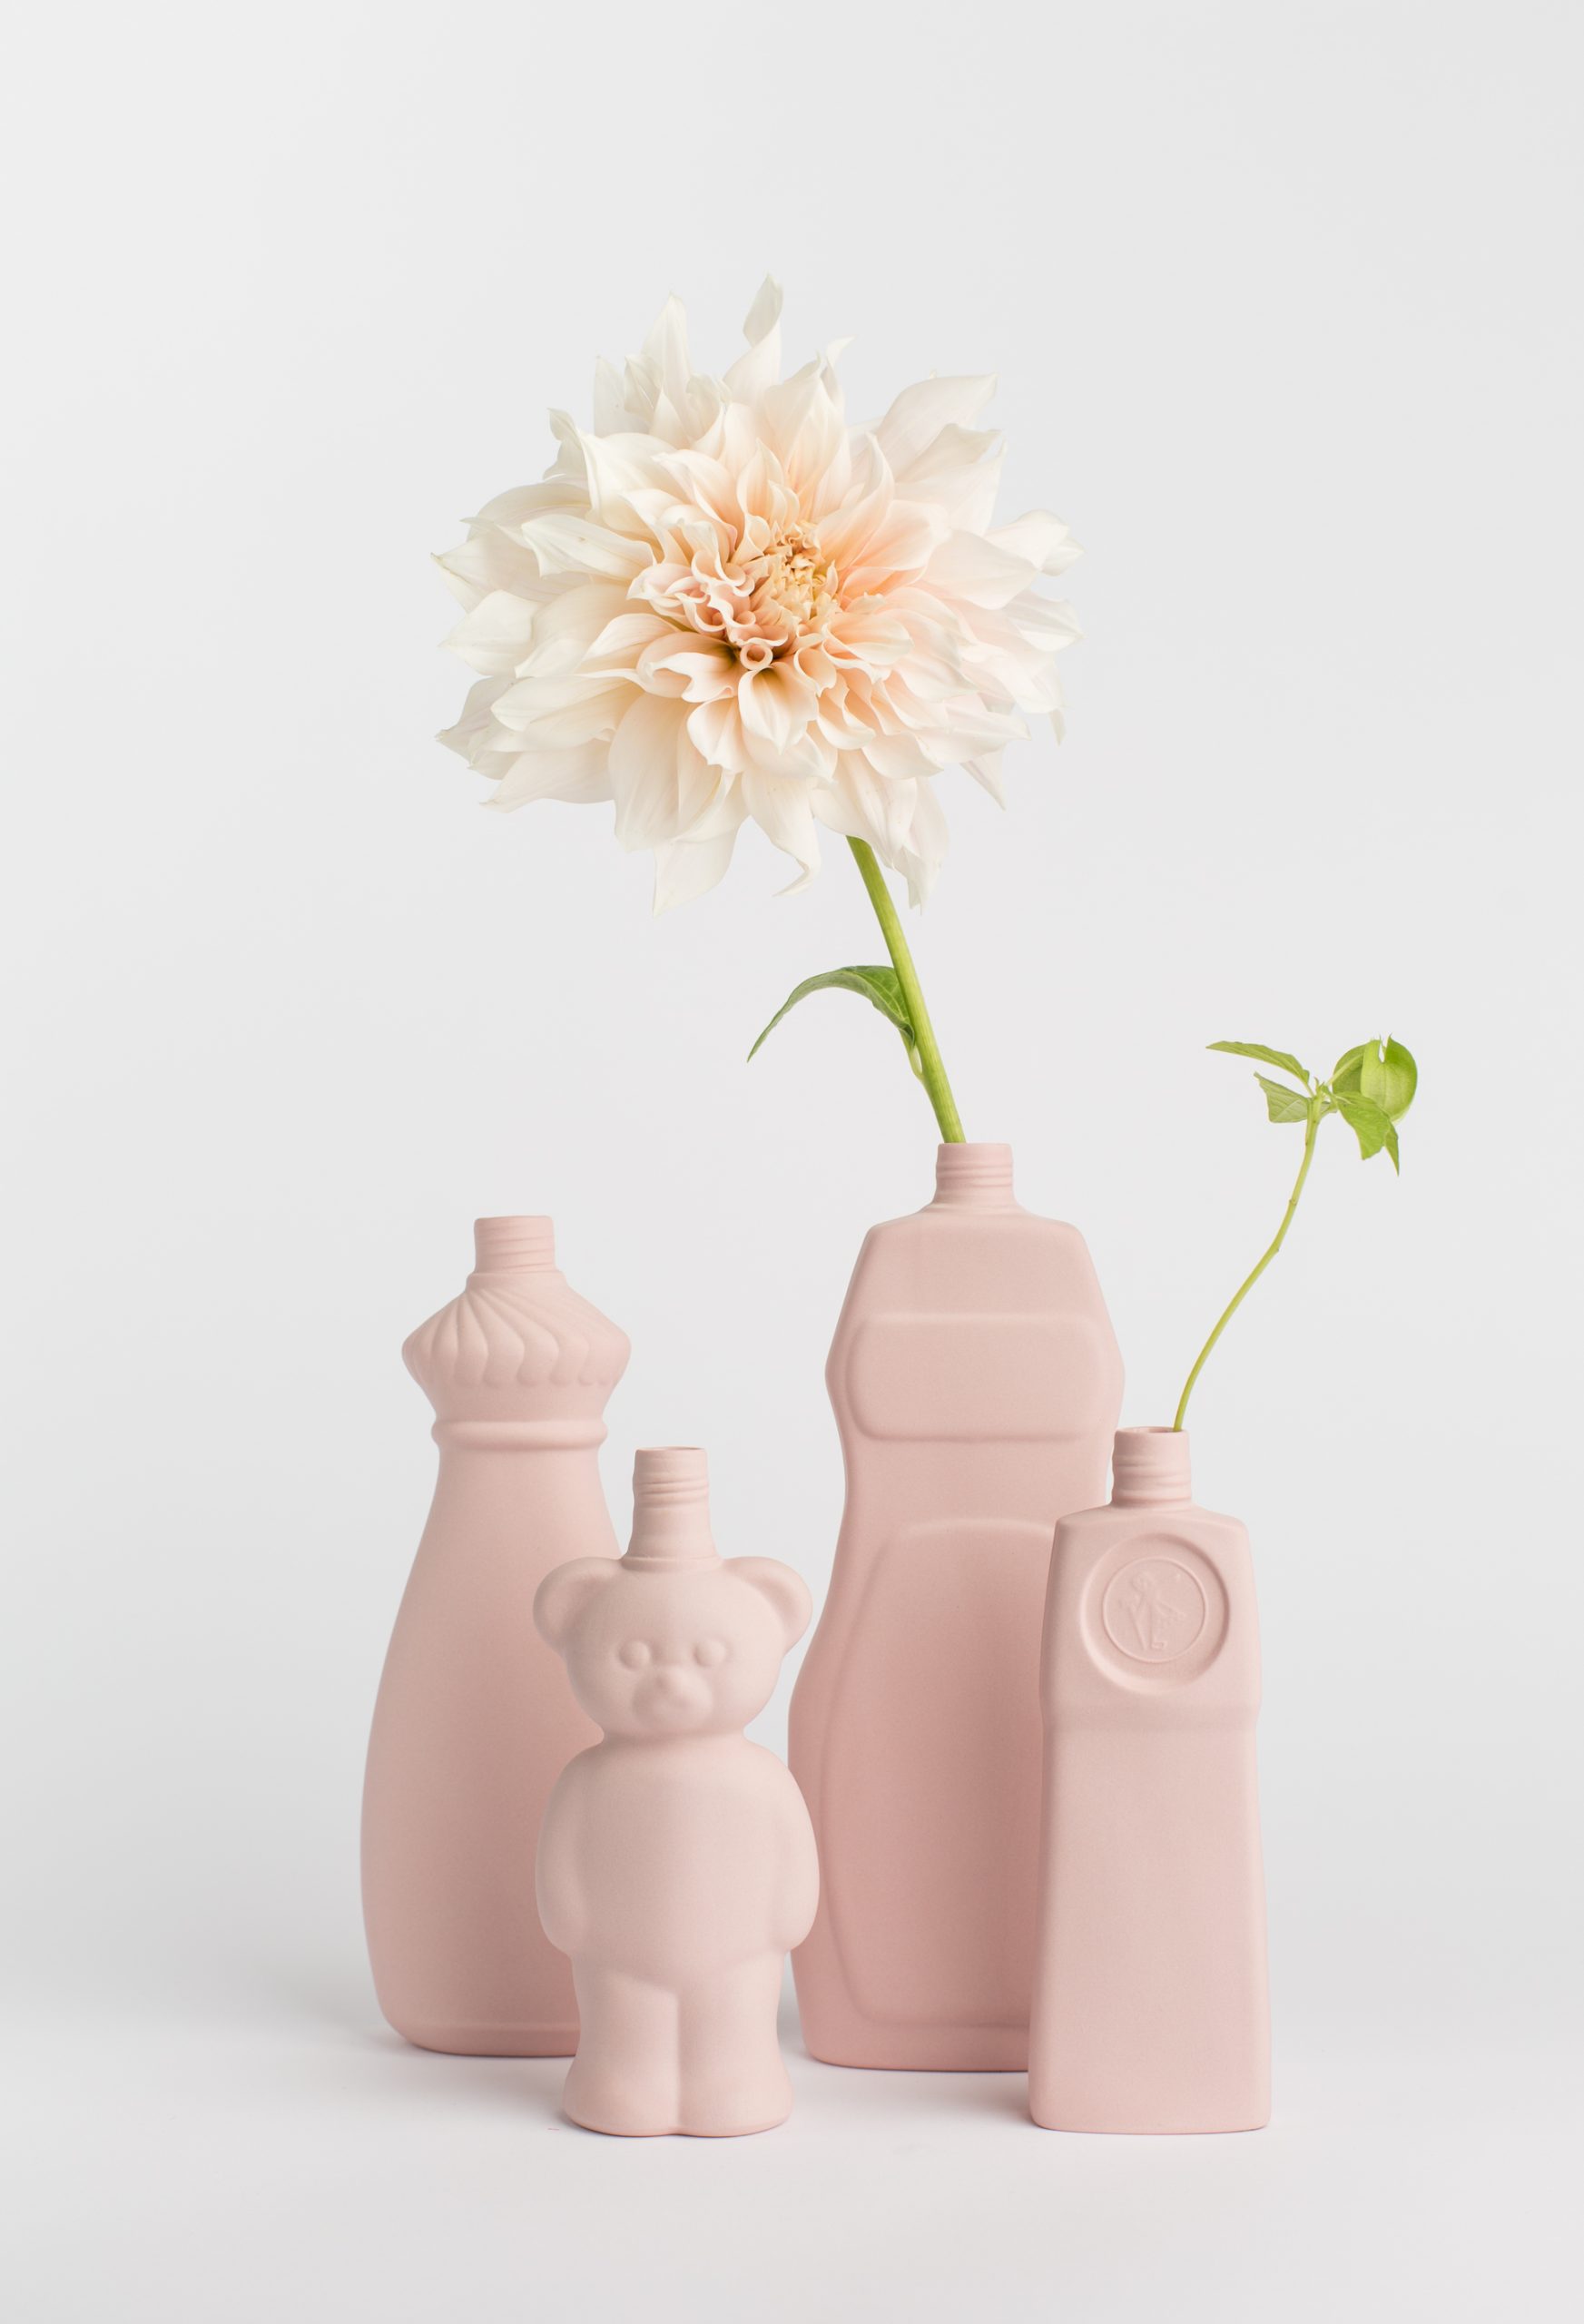 group photo in pink vases